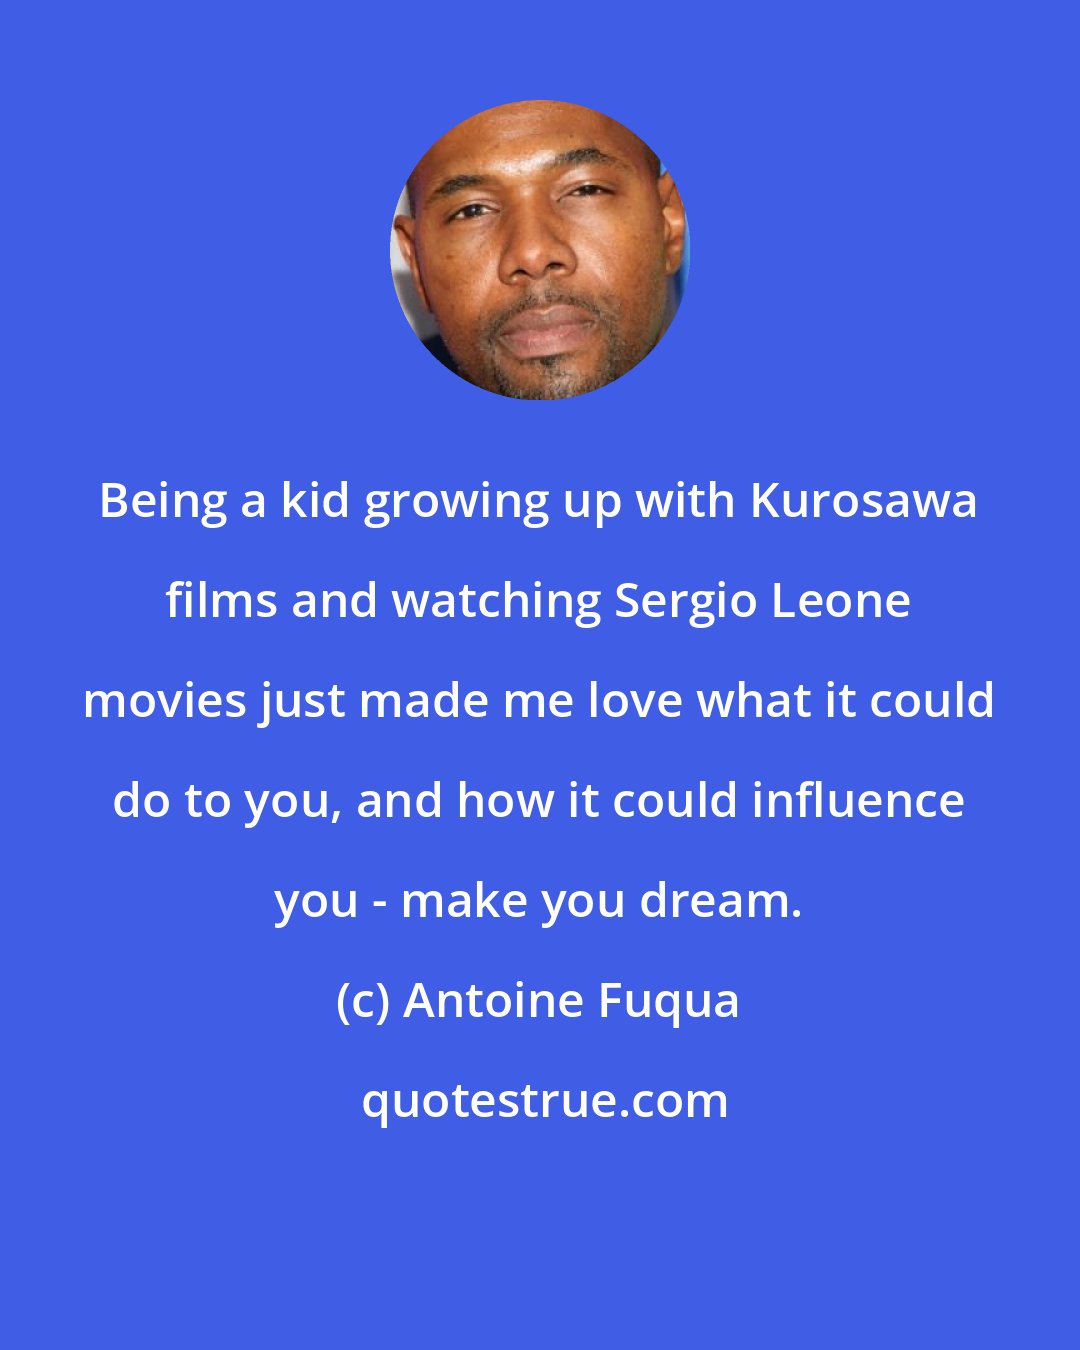 Antoine Fuqua: Being a kid growing up with Kurosawa films and watching Sergio Leone movies just made me love what it could do to you, and how it could influence you - make you dream.